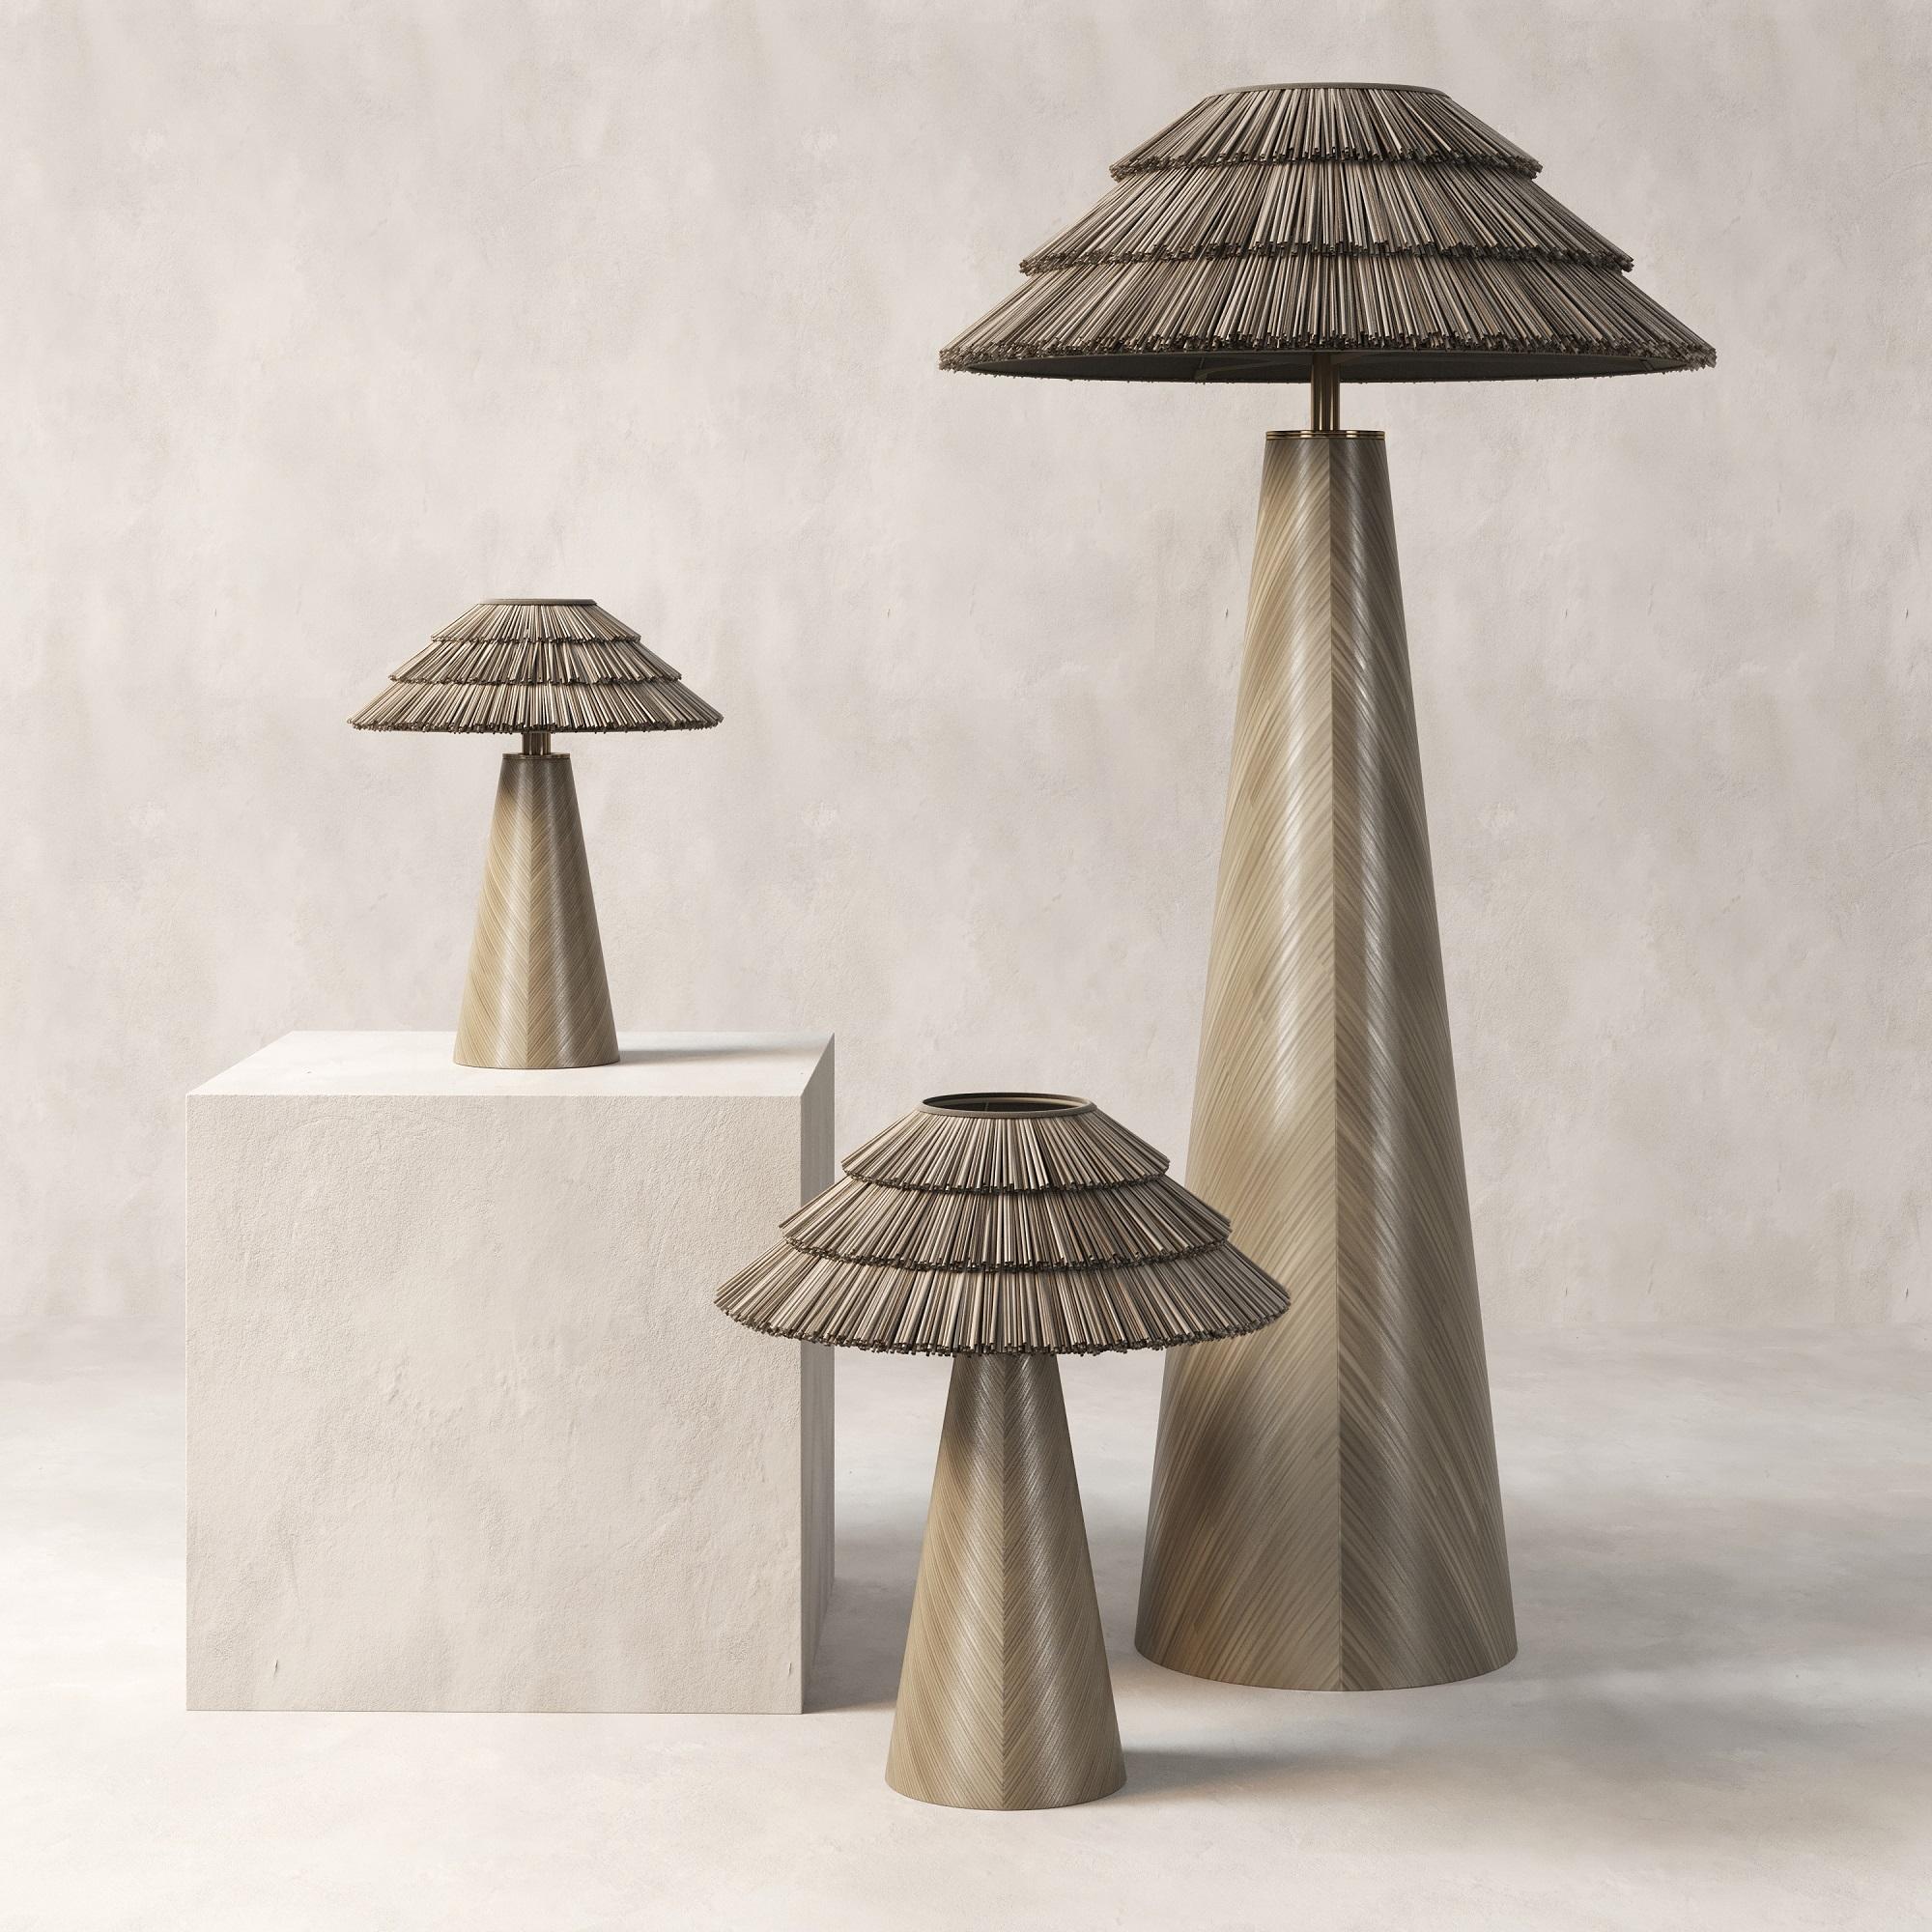 Due to the war, many Ukrainians lost their homes and had to arrange their lives in temporary places of residence. The Roots of Home collection has an associative resemblance to an ancient Ukrainian hut, where the lampshade resembles a roof with a